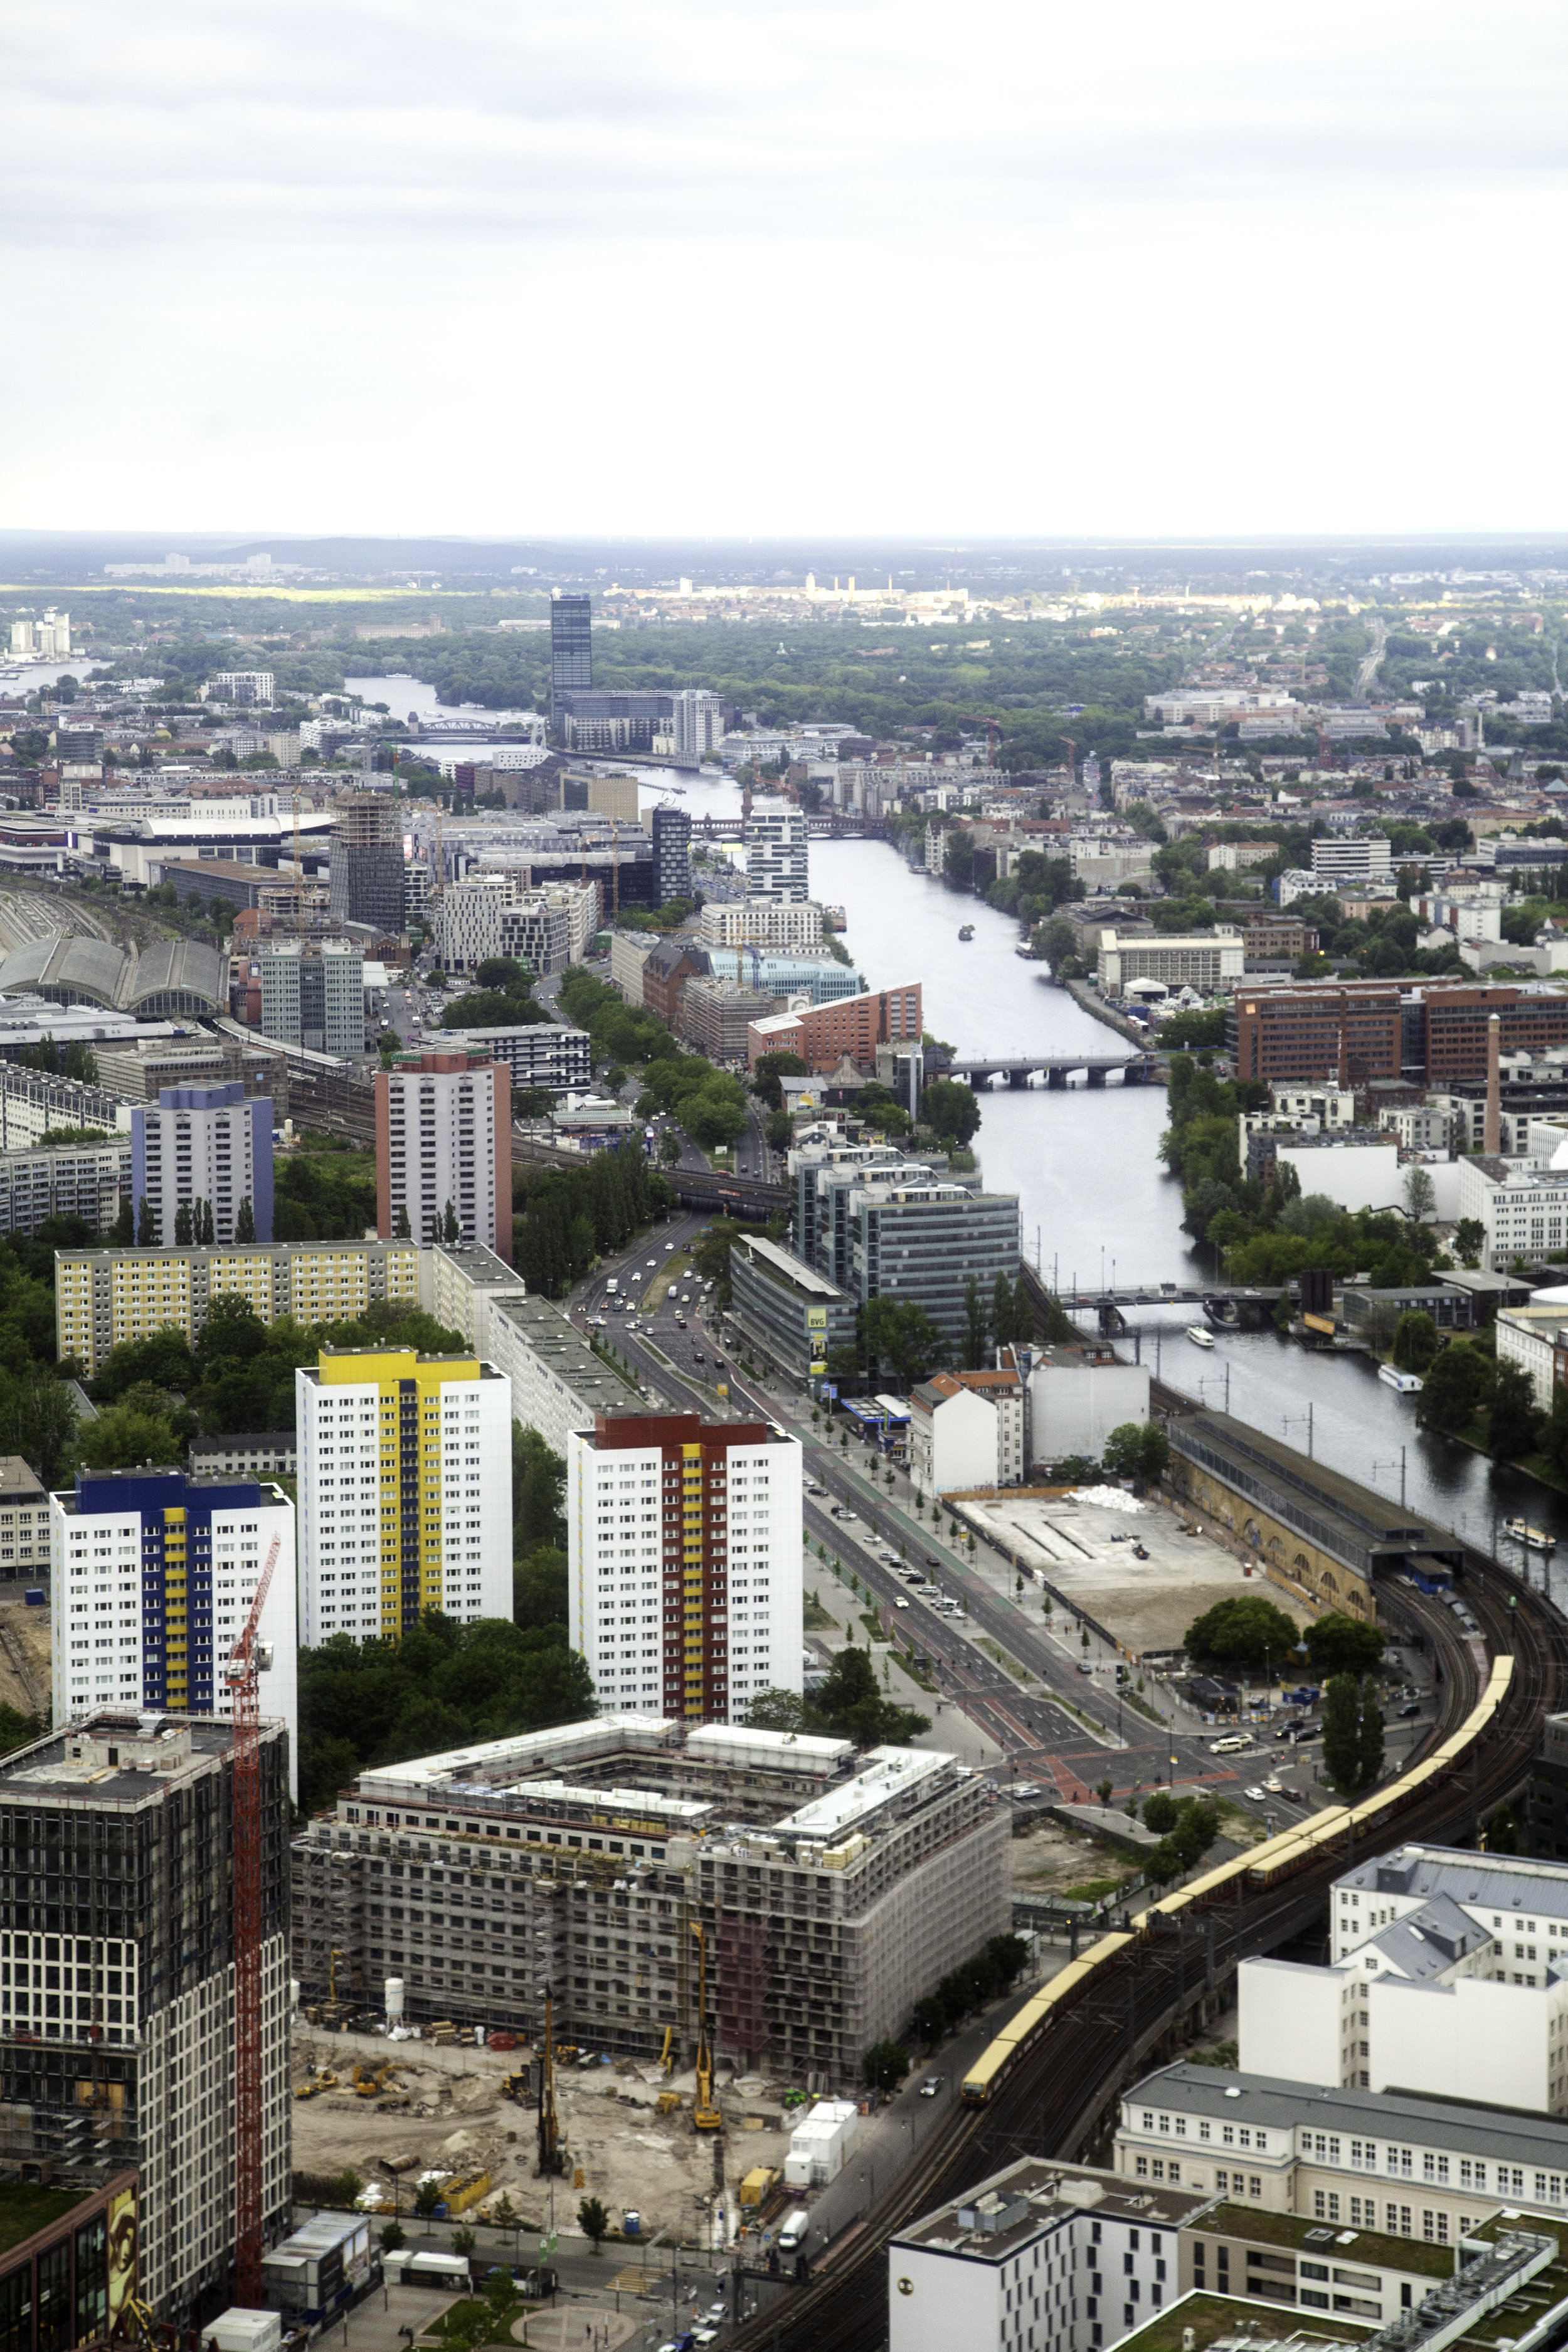 View from the Fernsehturm I